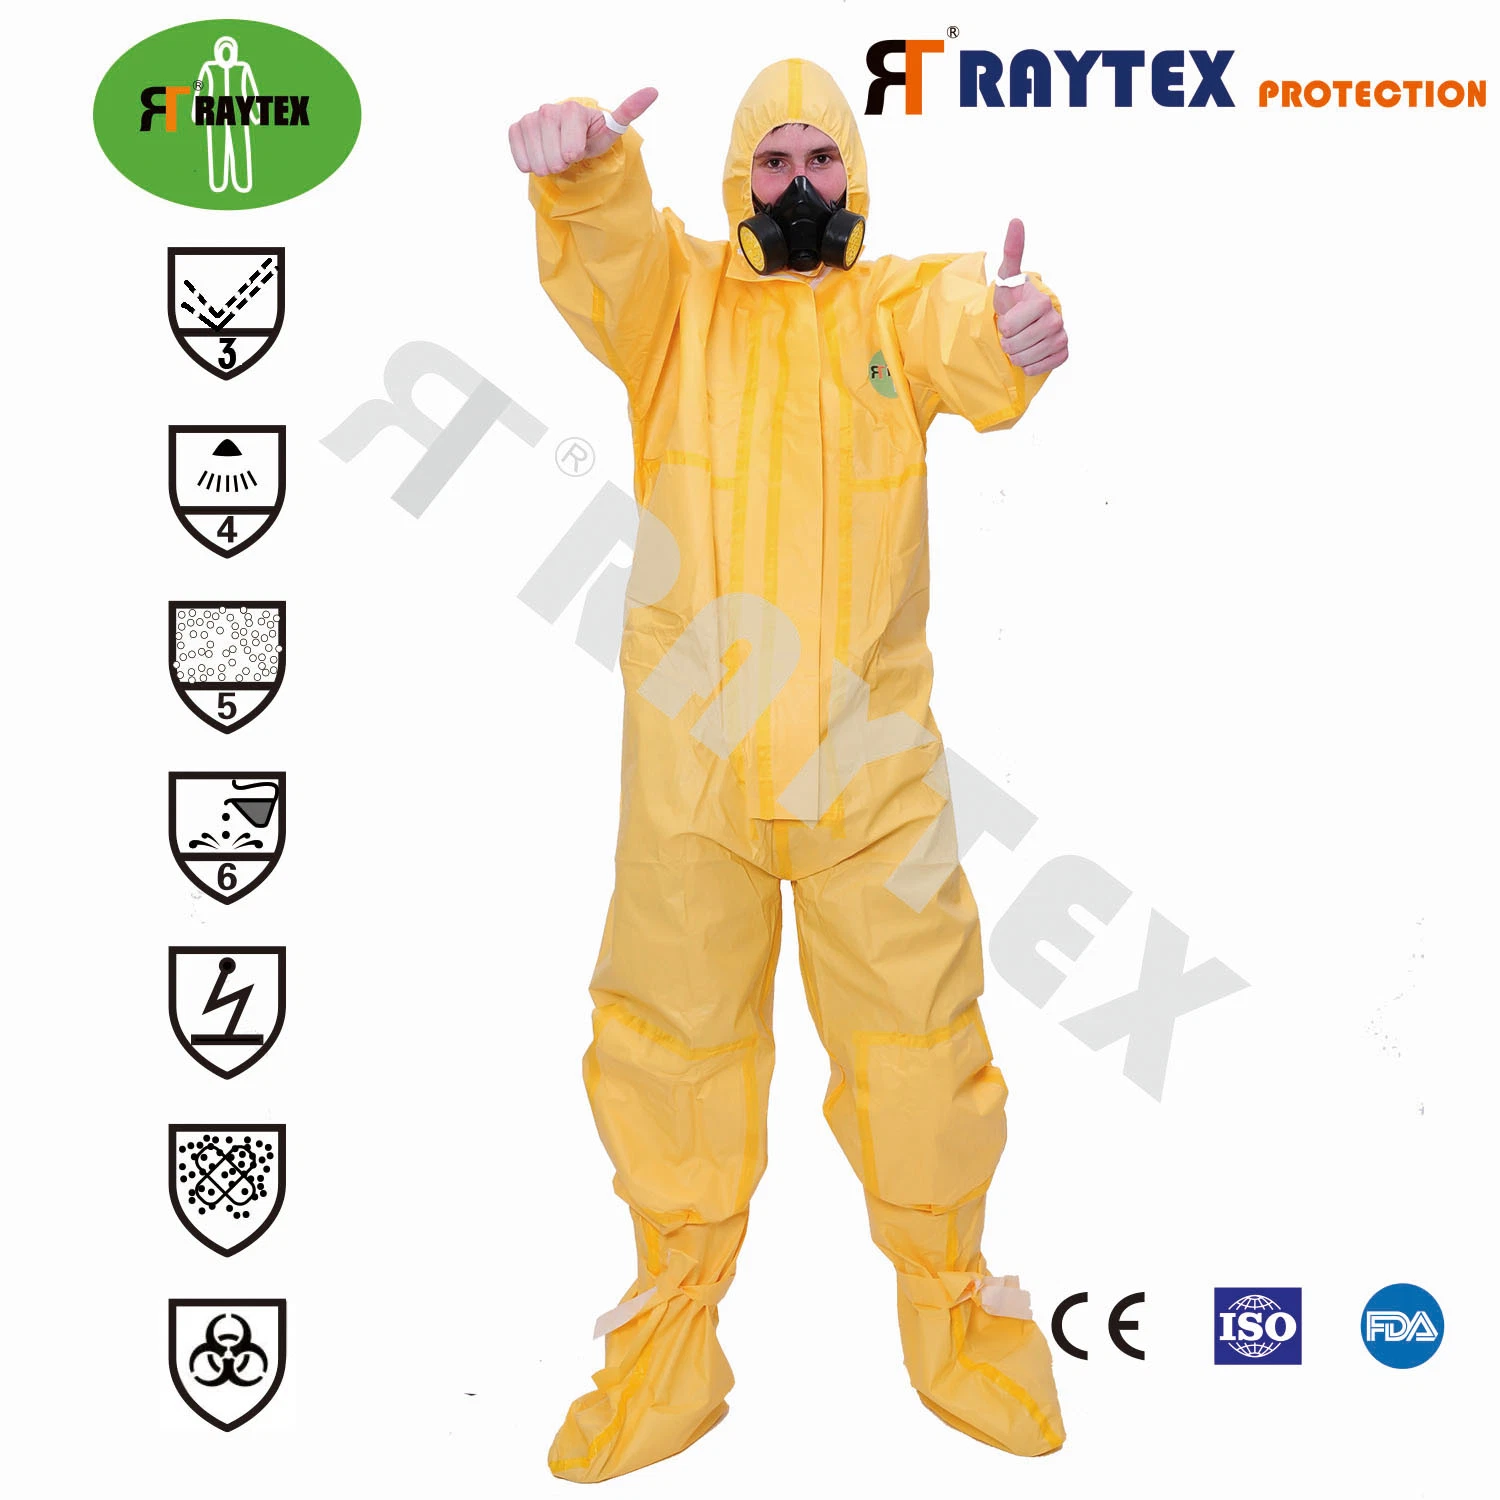 The Most Protective Disposable Surgical/Medical/Waterproof/Working/Safety/Clothing SMS/PE 90g with 2 Zipper and Hood or Boot for Hospital